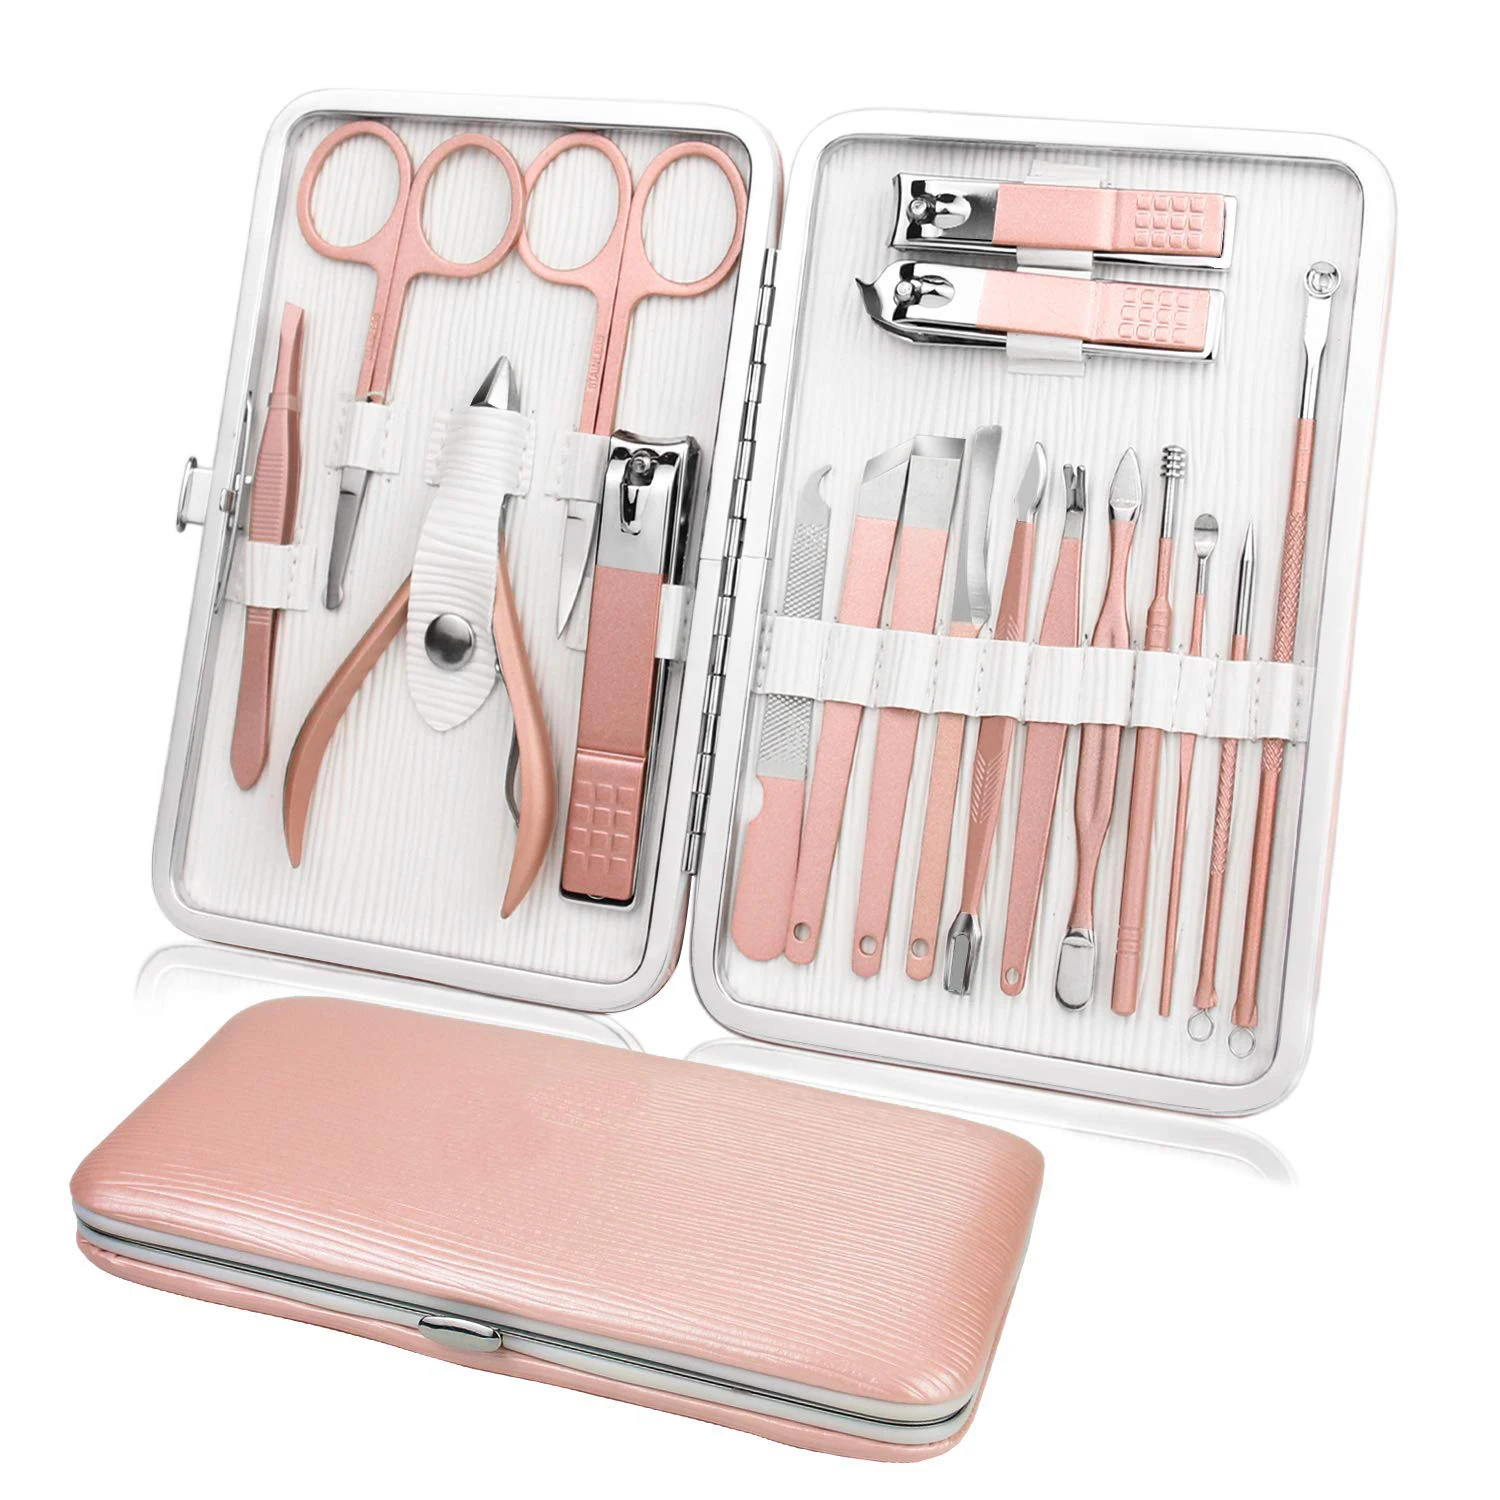 Manicure Pedicure Set Travel Professional Stainless Steel Nail Care Kits With Leather Case - Buy Manicure Pedicure Set Travel,Nail Kits,Manicure Pedicure With Leather Case Product on Alibaba.com